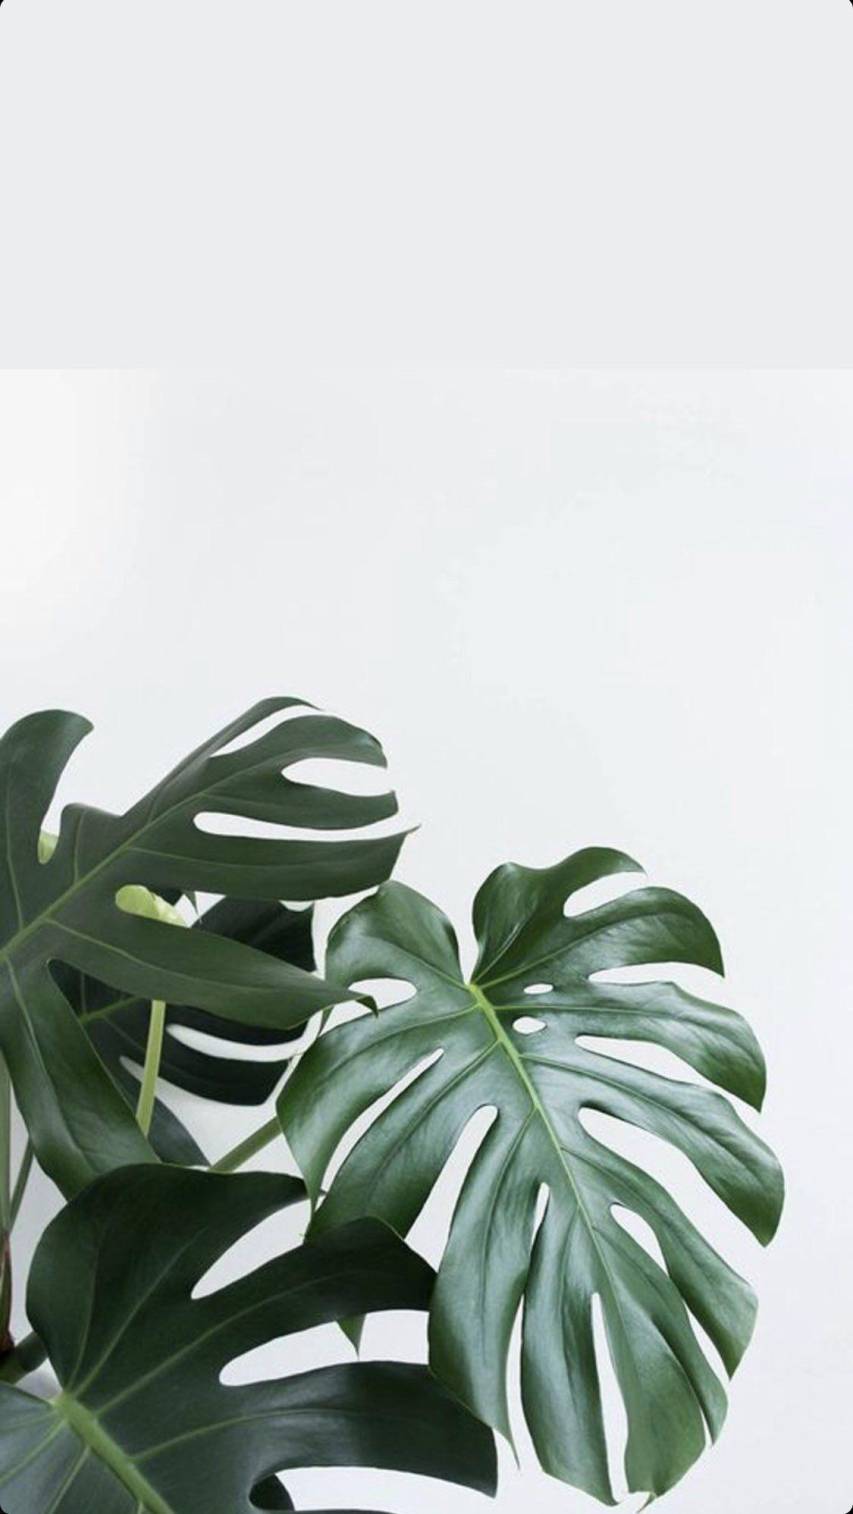 Monstera leaves on a white background - Sage green